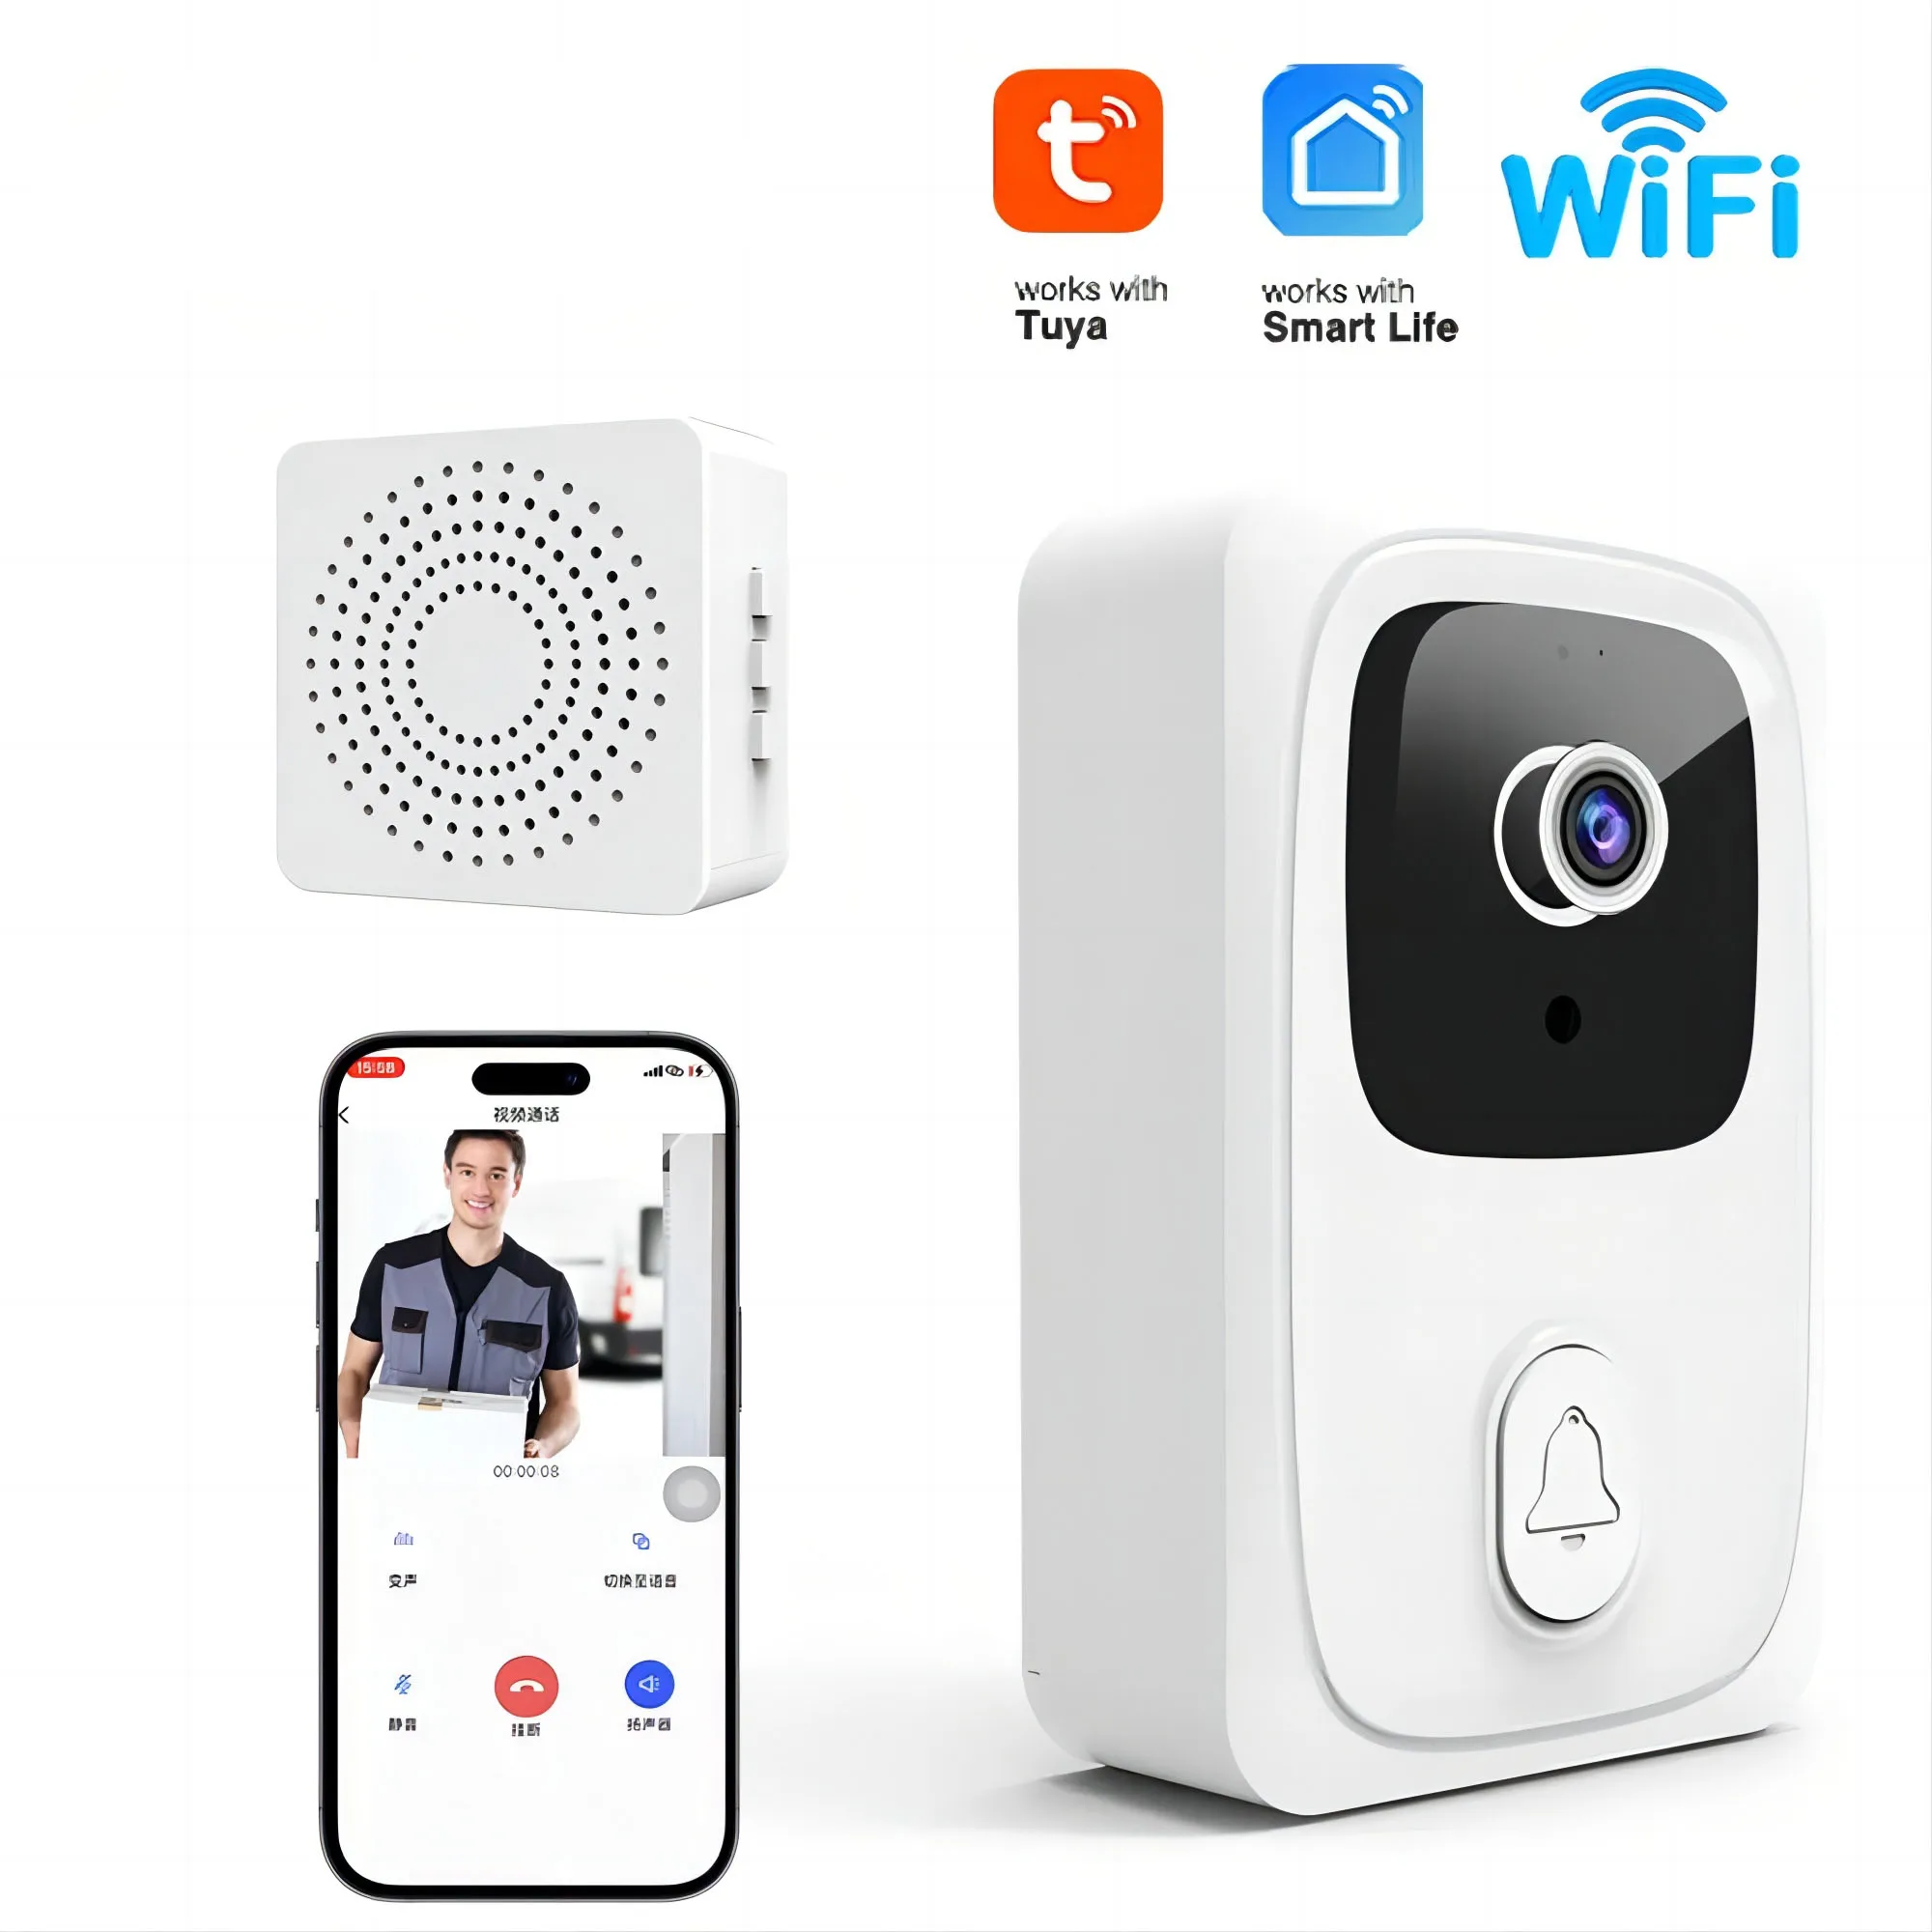 Tuya Video Doorbell Wireless WiFi Door Bell Camera Smart Home Security Night Vision Motion Detection Visual Intercom with Chime wireless wifi doorbell camera waterproof 720p hd video door bell smart home outdoor wireless doorbell with camera night vision